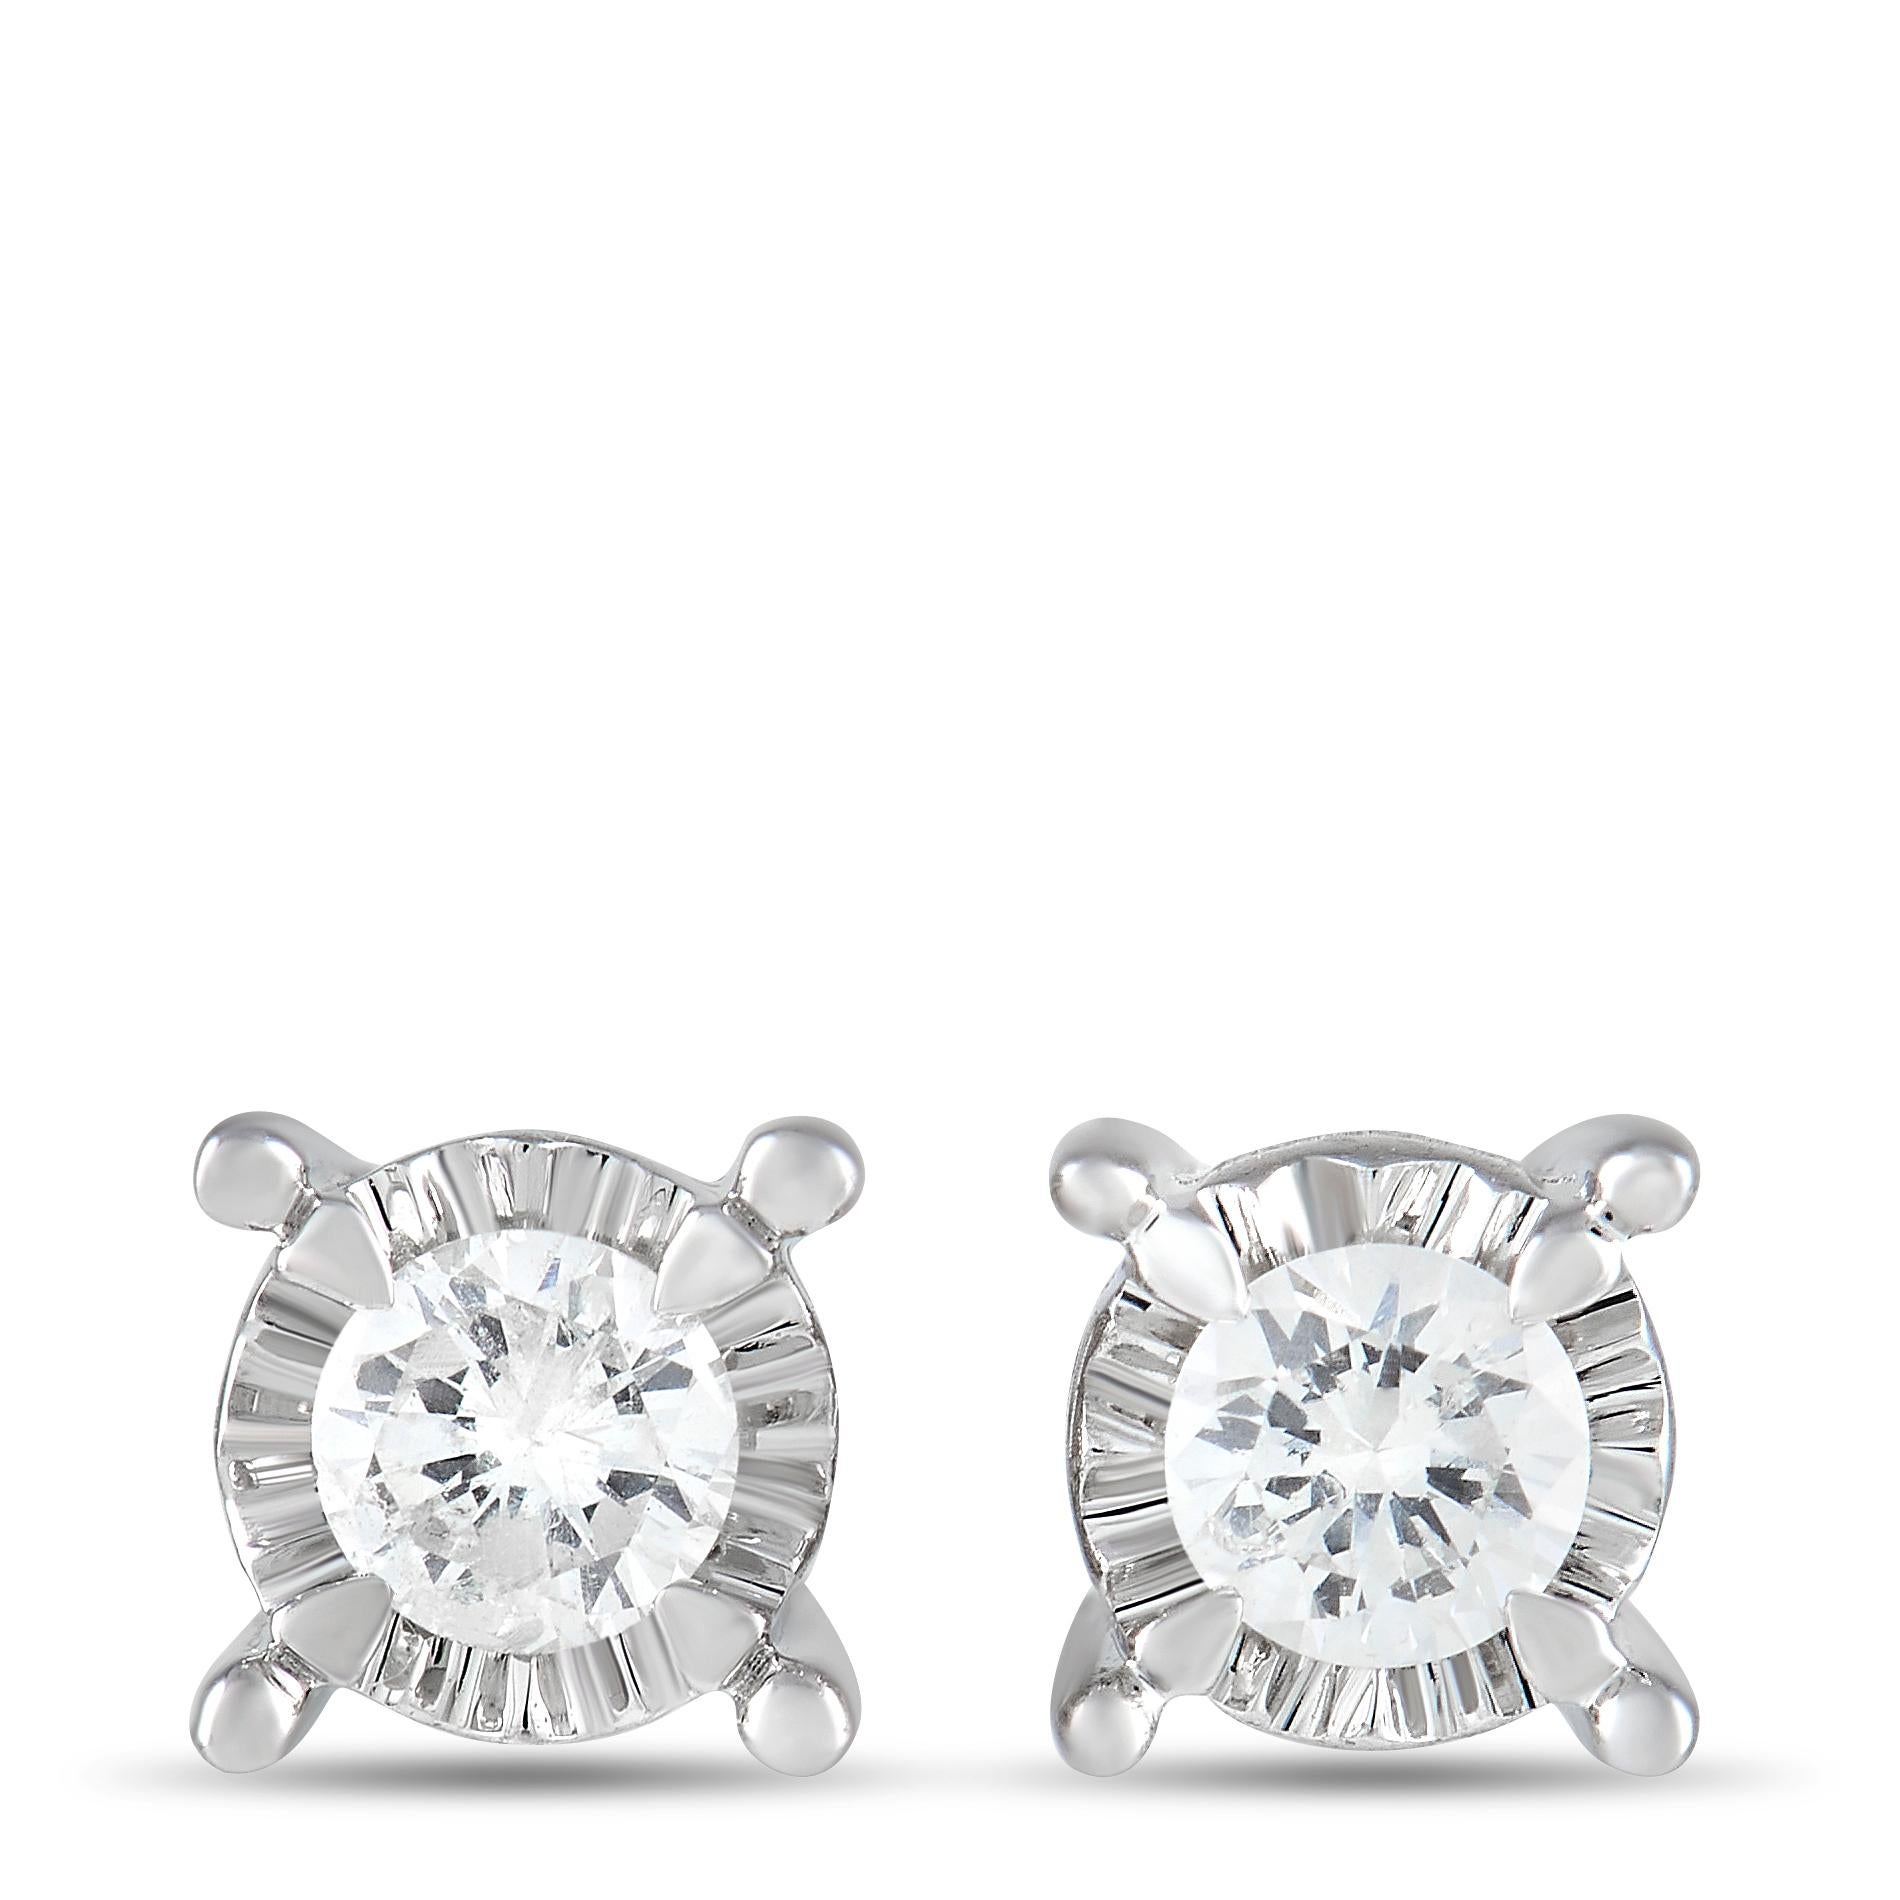 Made with diamonds that together possess a total weight of 0.13 carats, these simple earrings are an effortless way to add a touch of luxury to any occasion. A textured 14K White Gold setting adds extra visual impact to these delicate earrings,